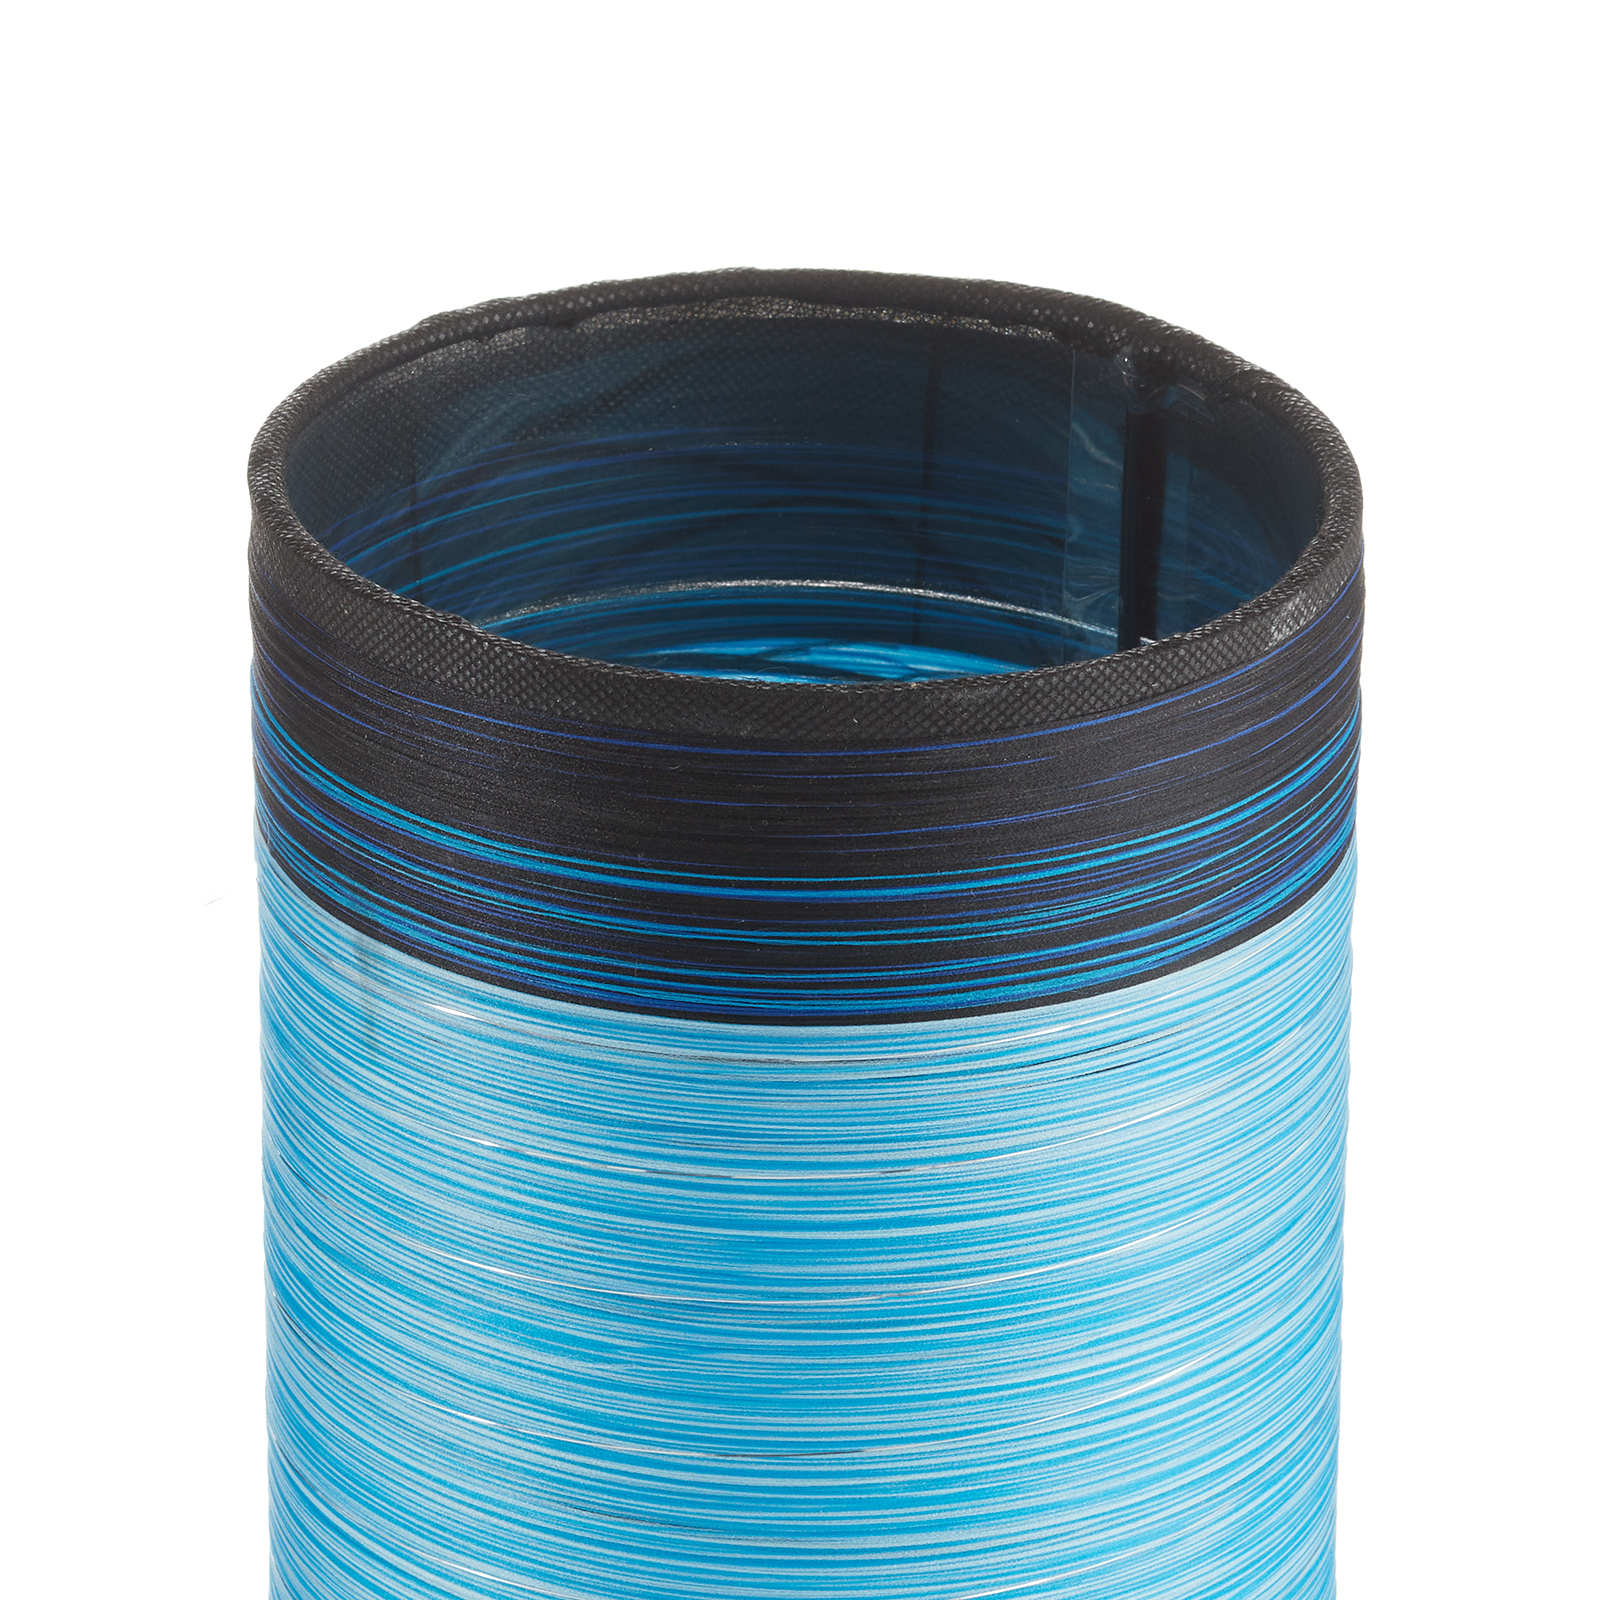 Julie table lamp wrapped in threads, blue